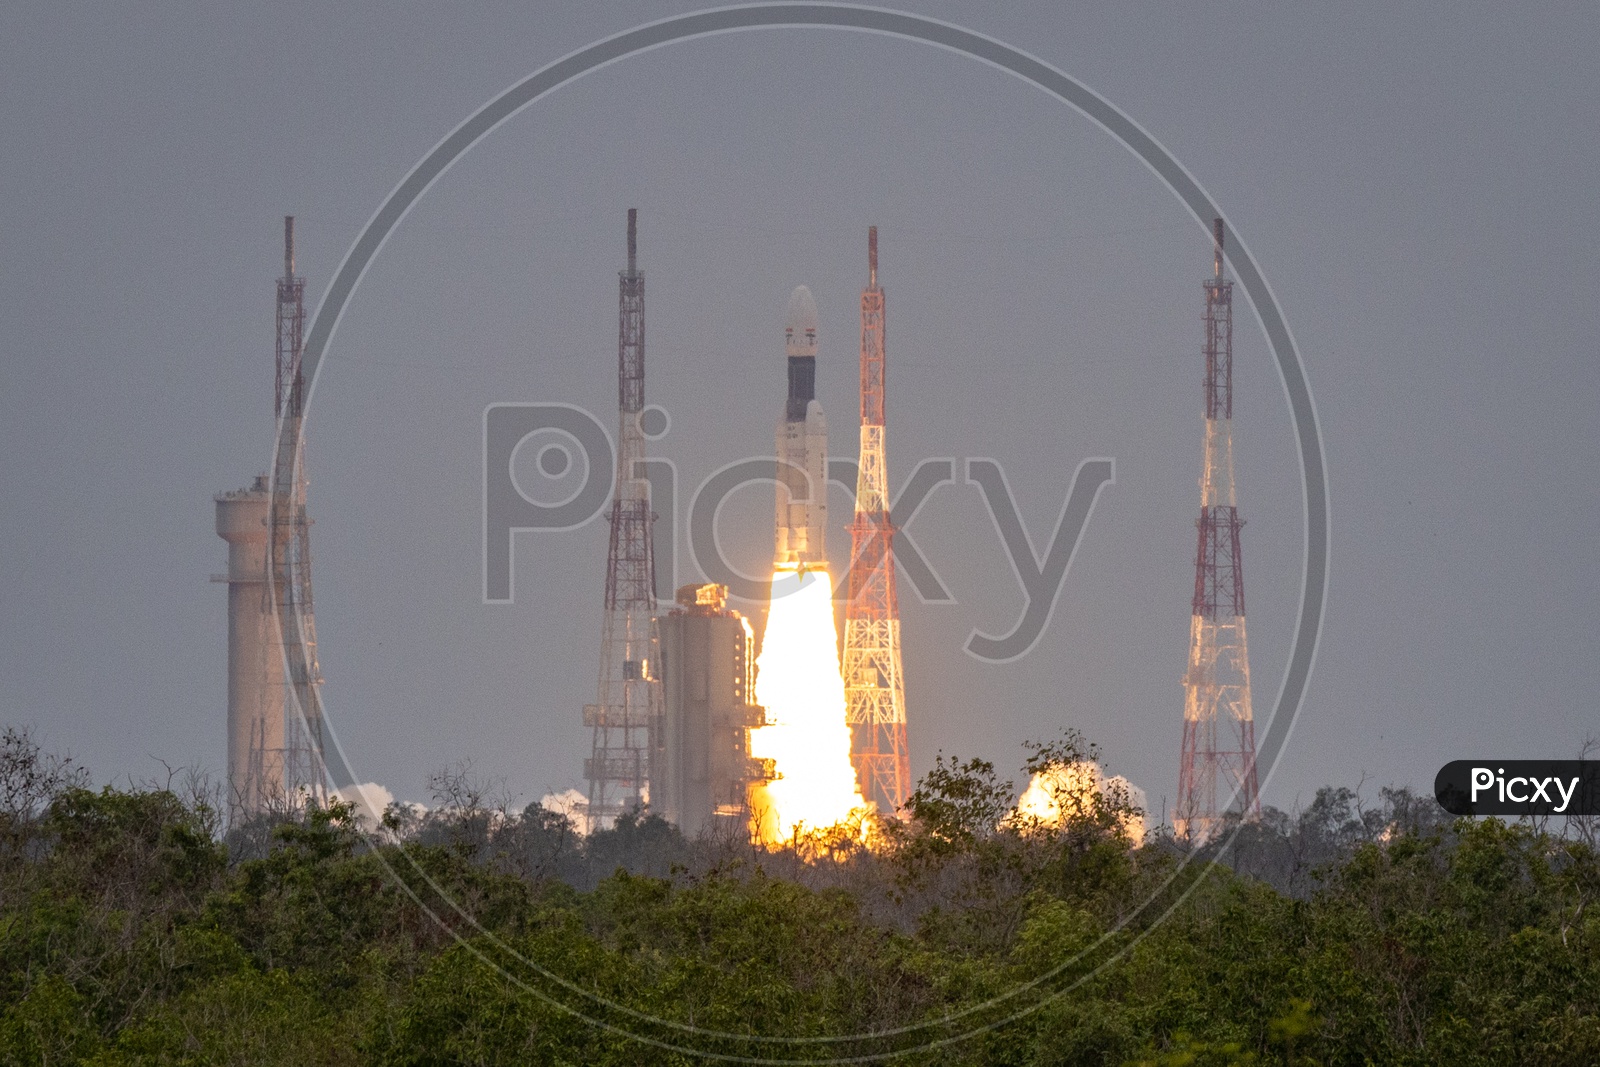 GSLV Mk III  M1  Or Chandrayaan 2  Spacecraft or Rocket Takeoff From Launch pad  At Satish Dhawan Space Centre SDSC SHAR in Sriharikota